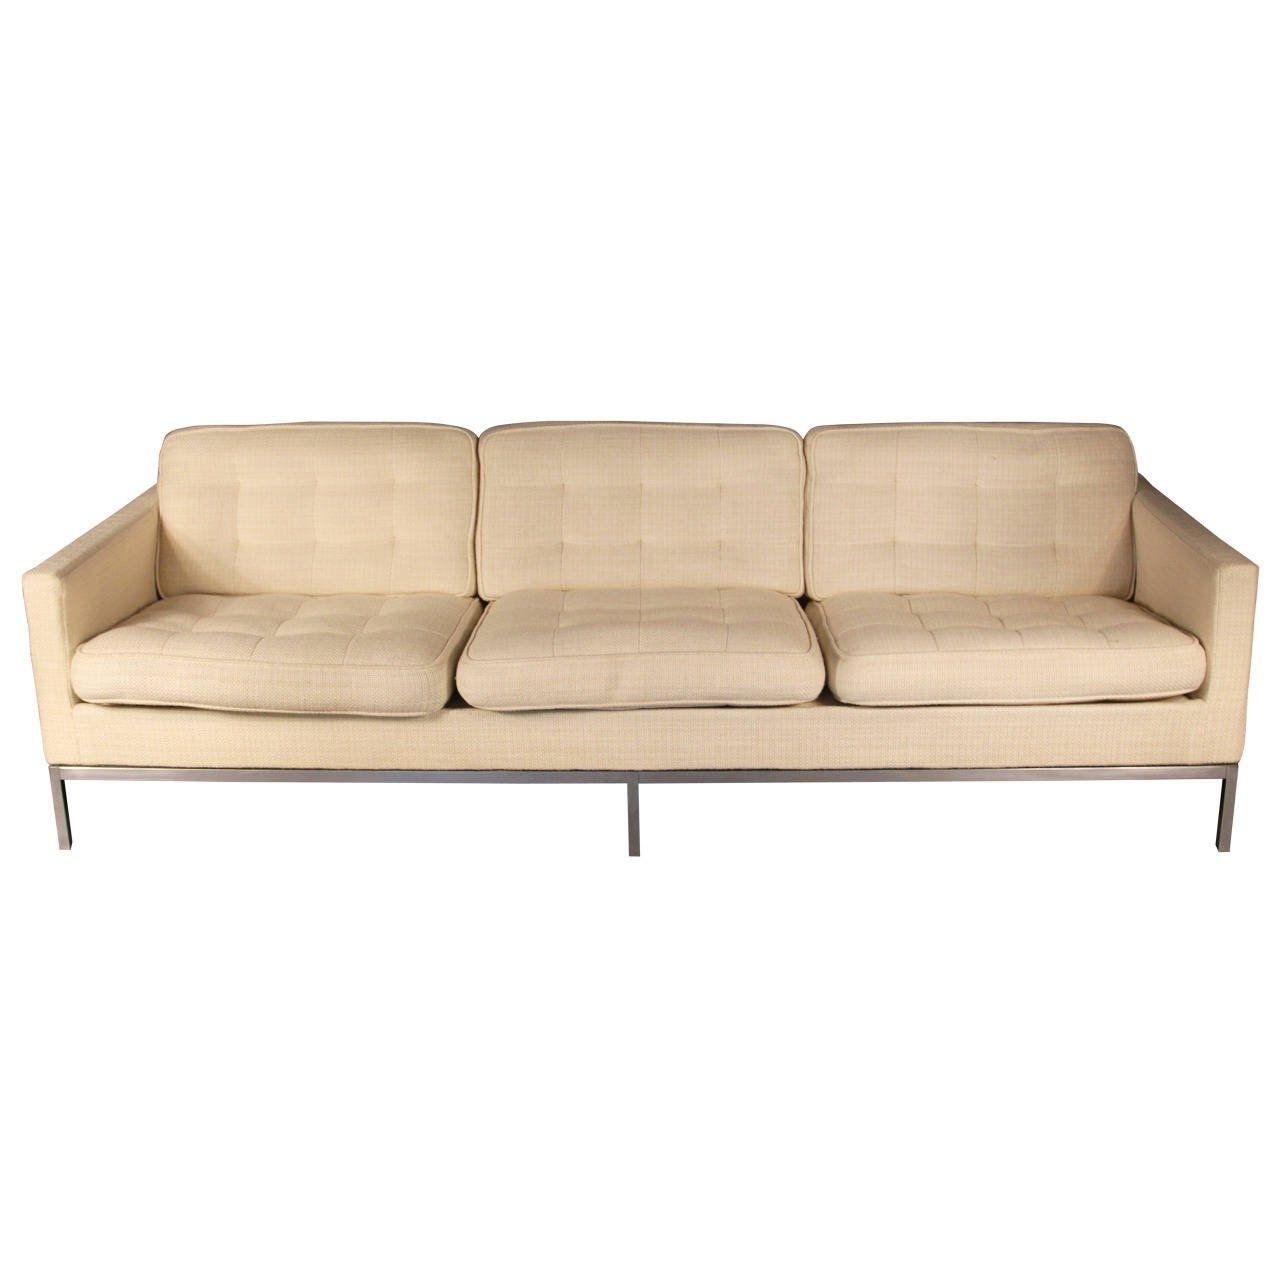 Florence Grand Sofas Throughout Most Current Florence Knoll Sofas – 61 For Sale At 1stdibs (Photo 6 of 20)